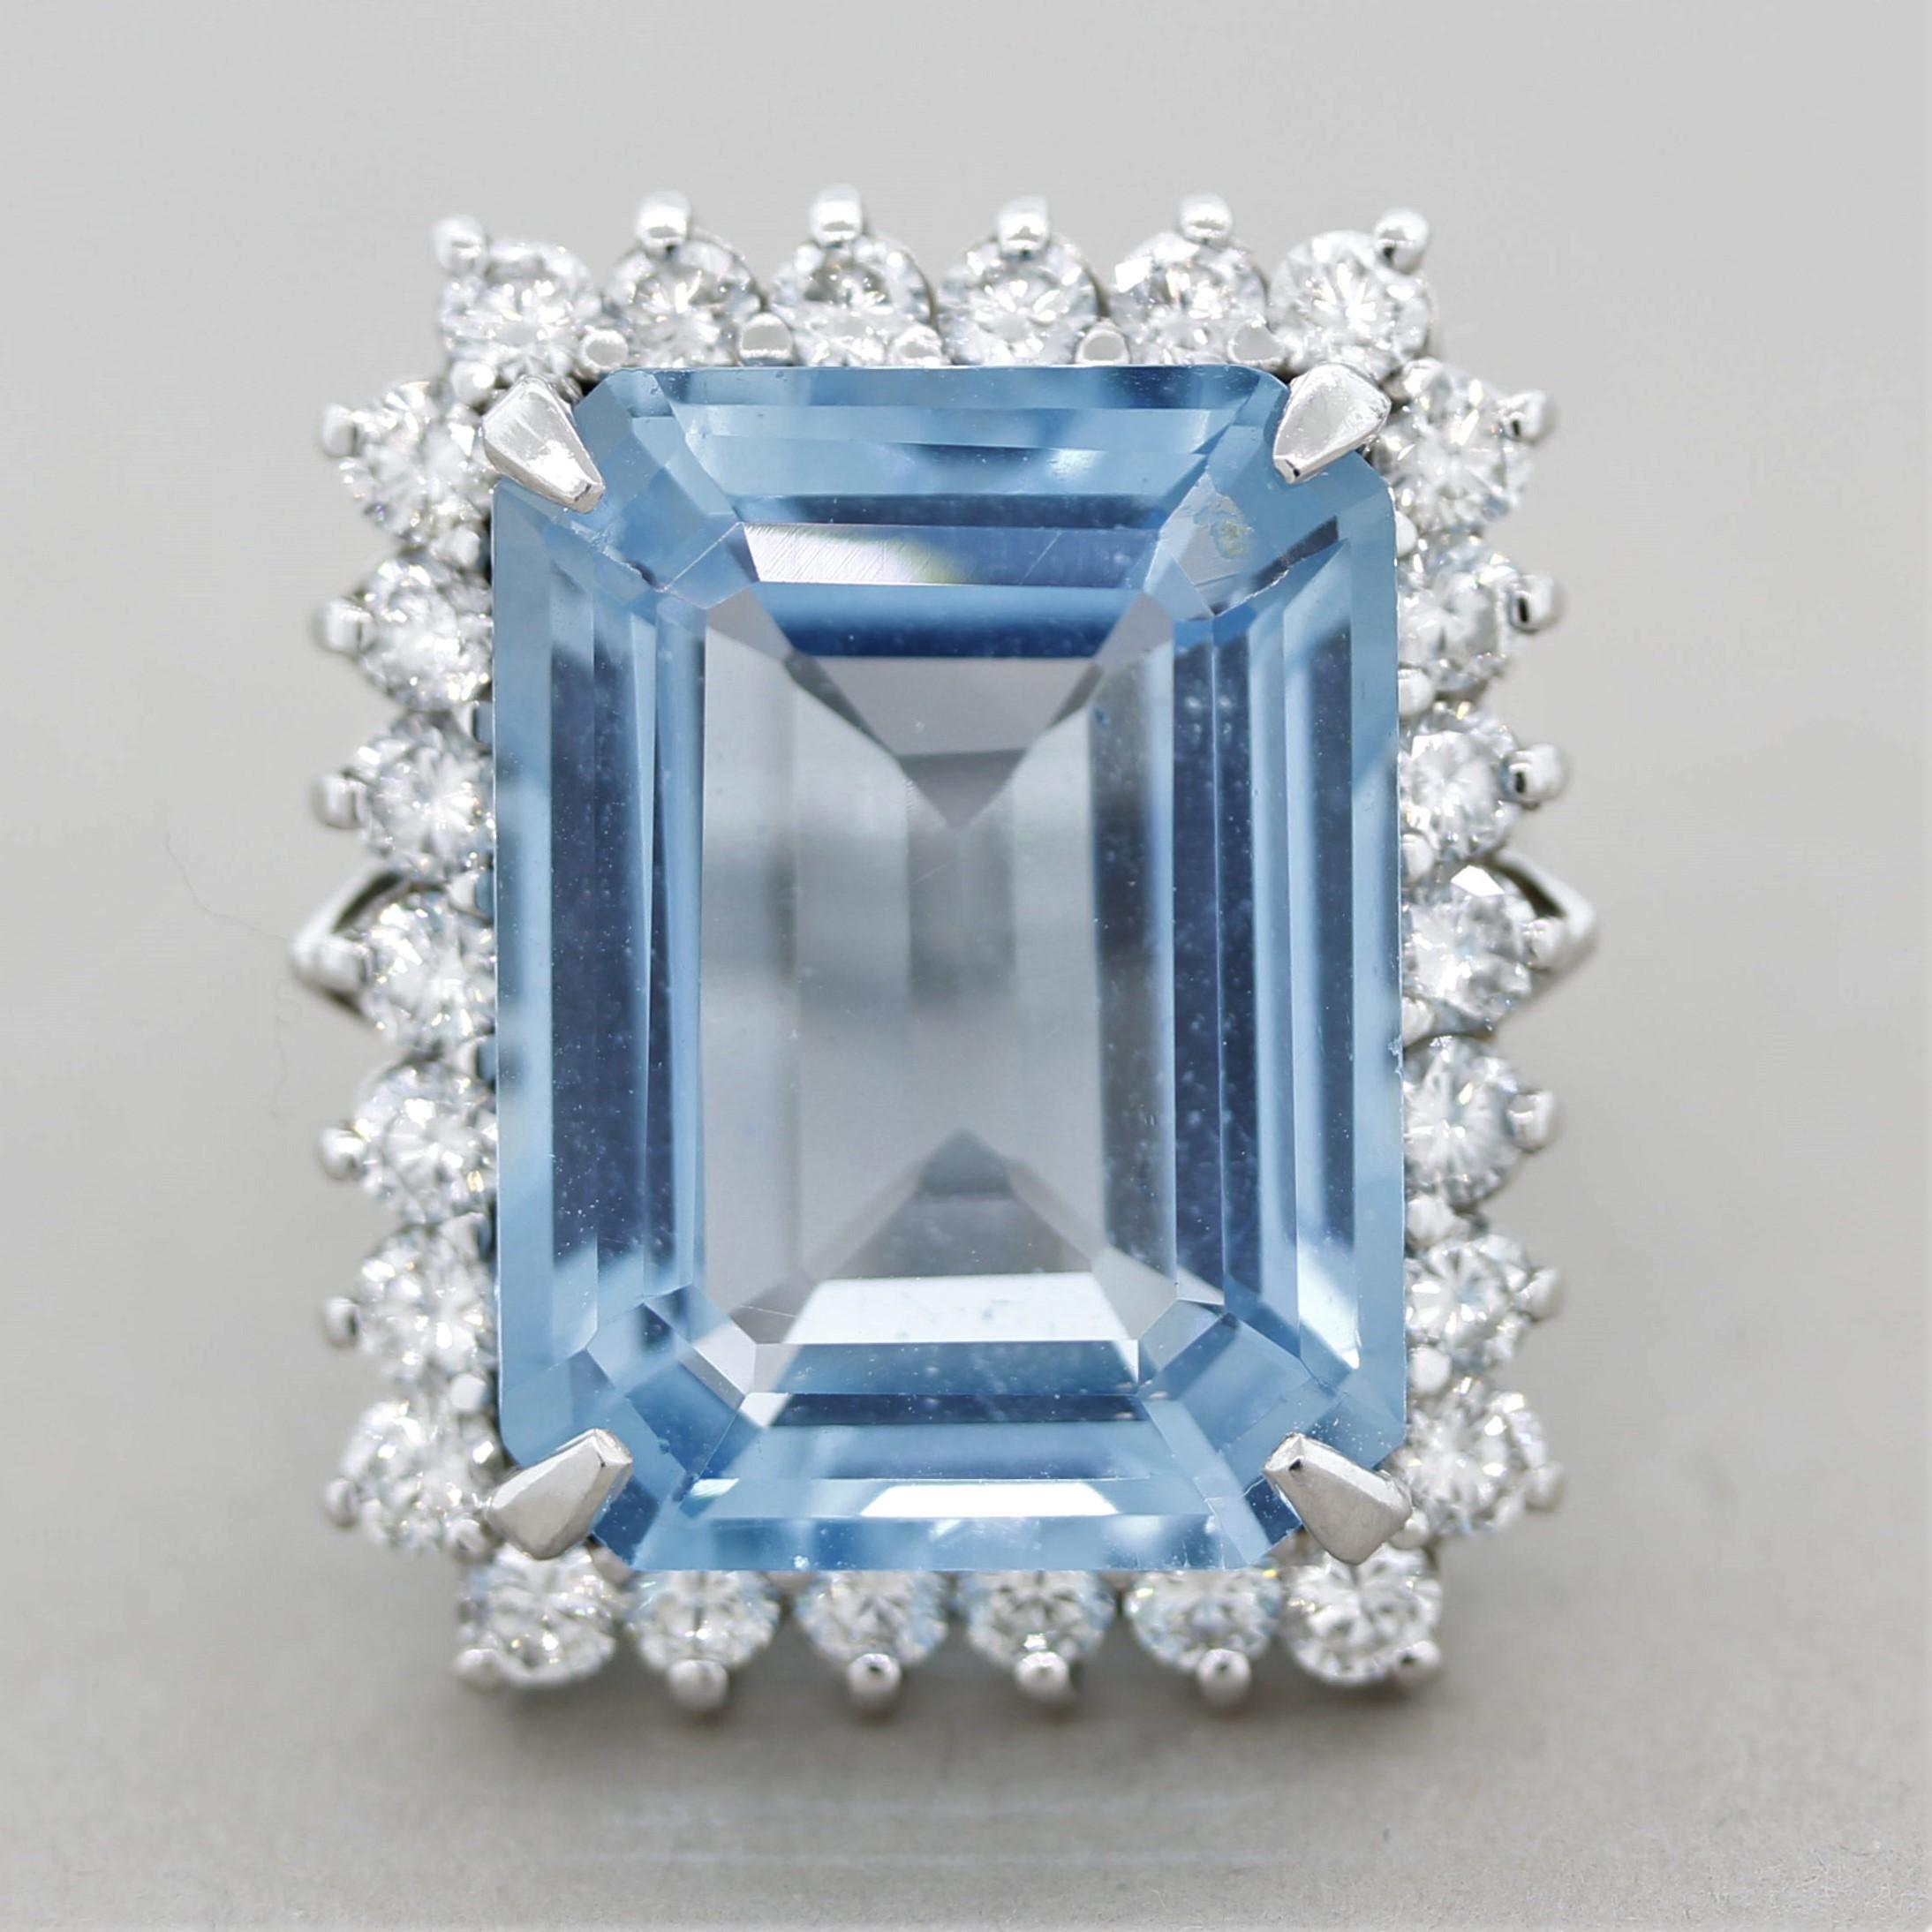 A large and luxurious blue topaz ring! The sky-blue colored gem weighs 25.69 carats and has a precise emerald-cut and rectangular shape that is free of any eye-visible inclusions. It is accented by 1.99 carats of round brilliant-cut diamonds which